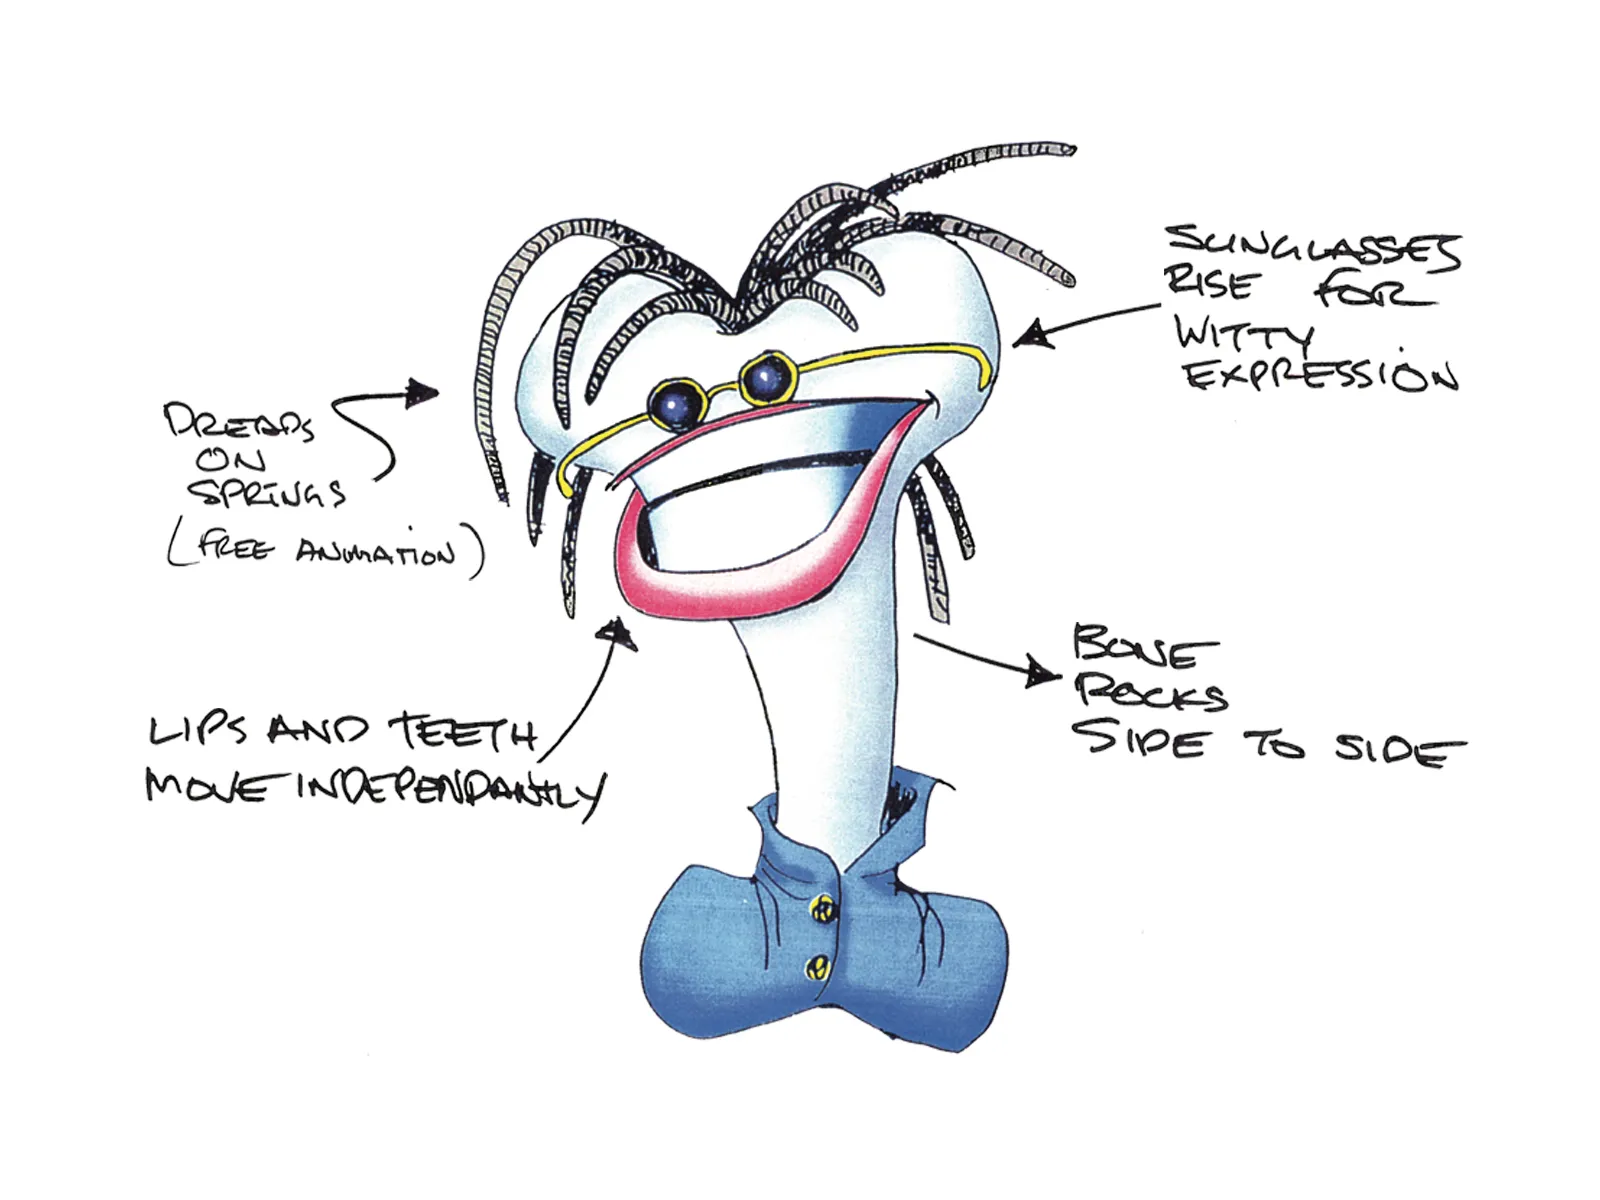 Planning drawing of Health Royale bone: Dreads on springs - free animation. Sunglasses for witty expression. Bone rocks side to side. Lips and teeth move independently.